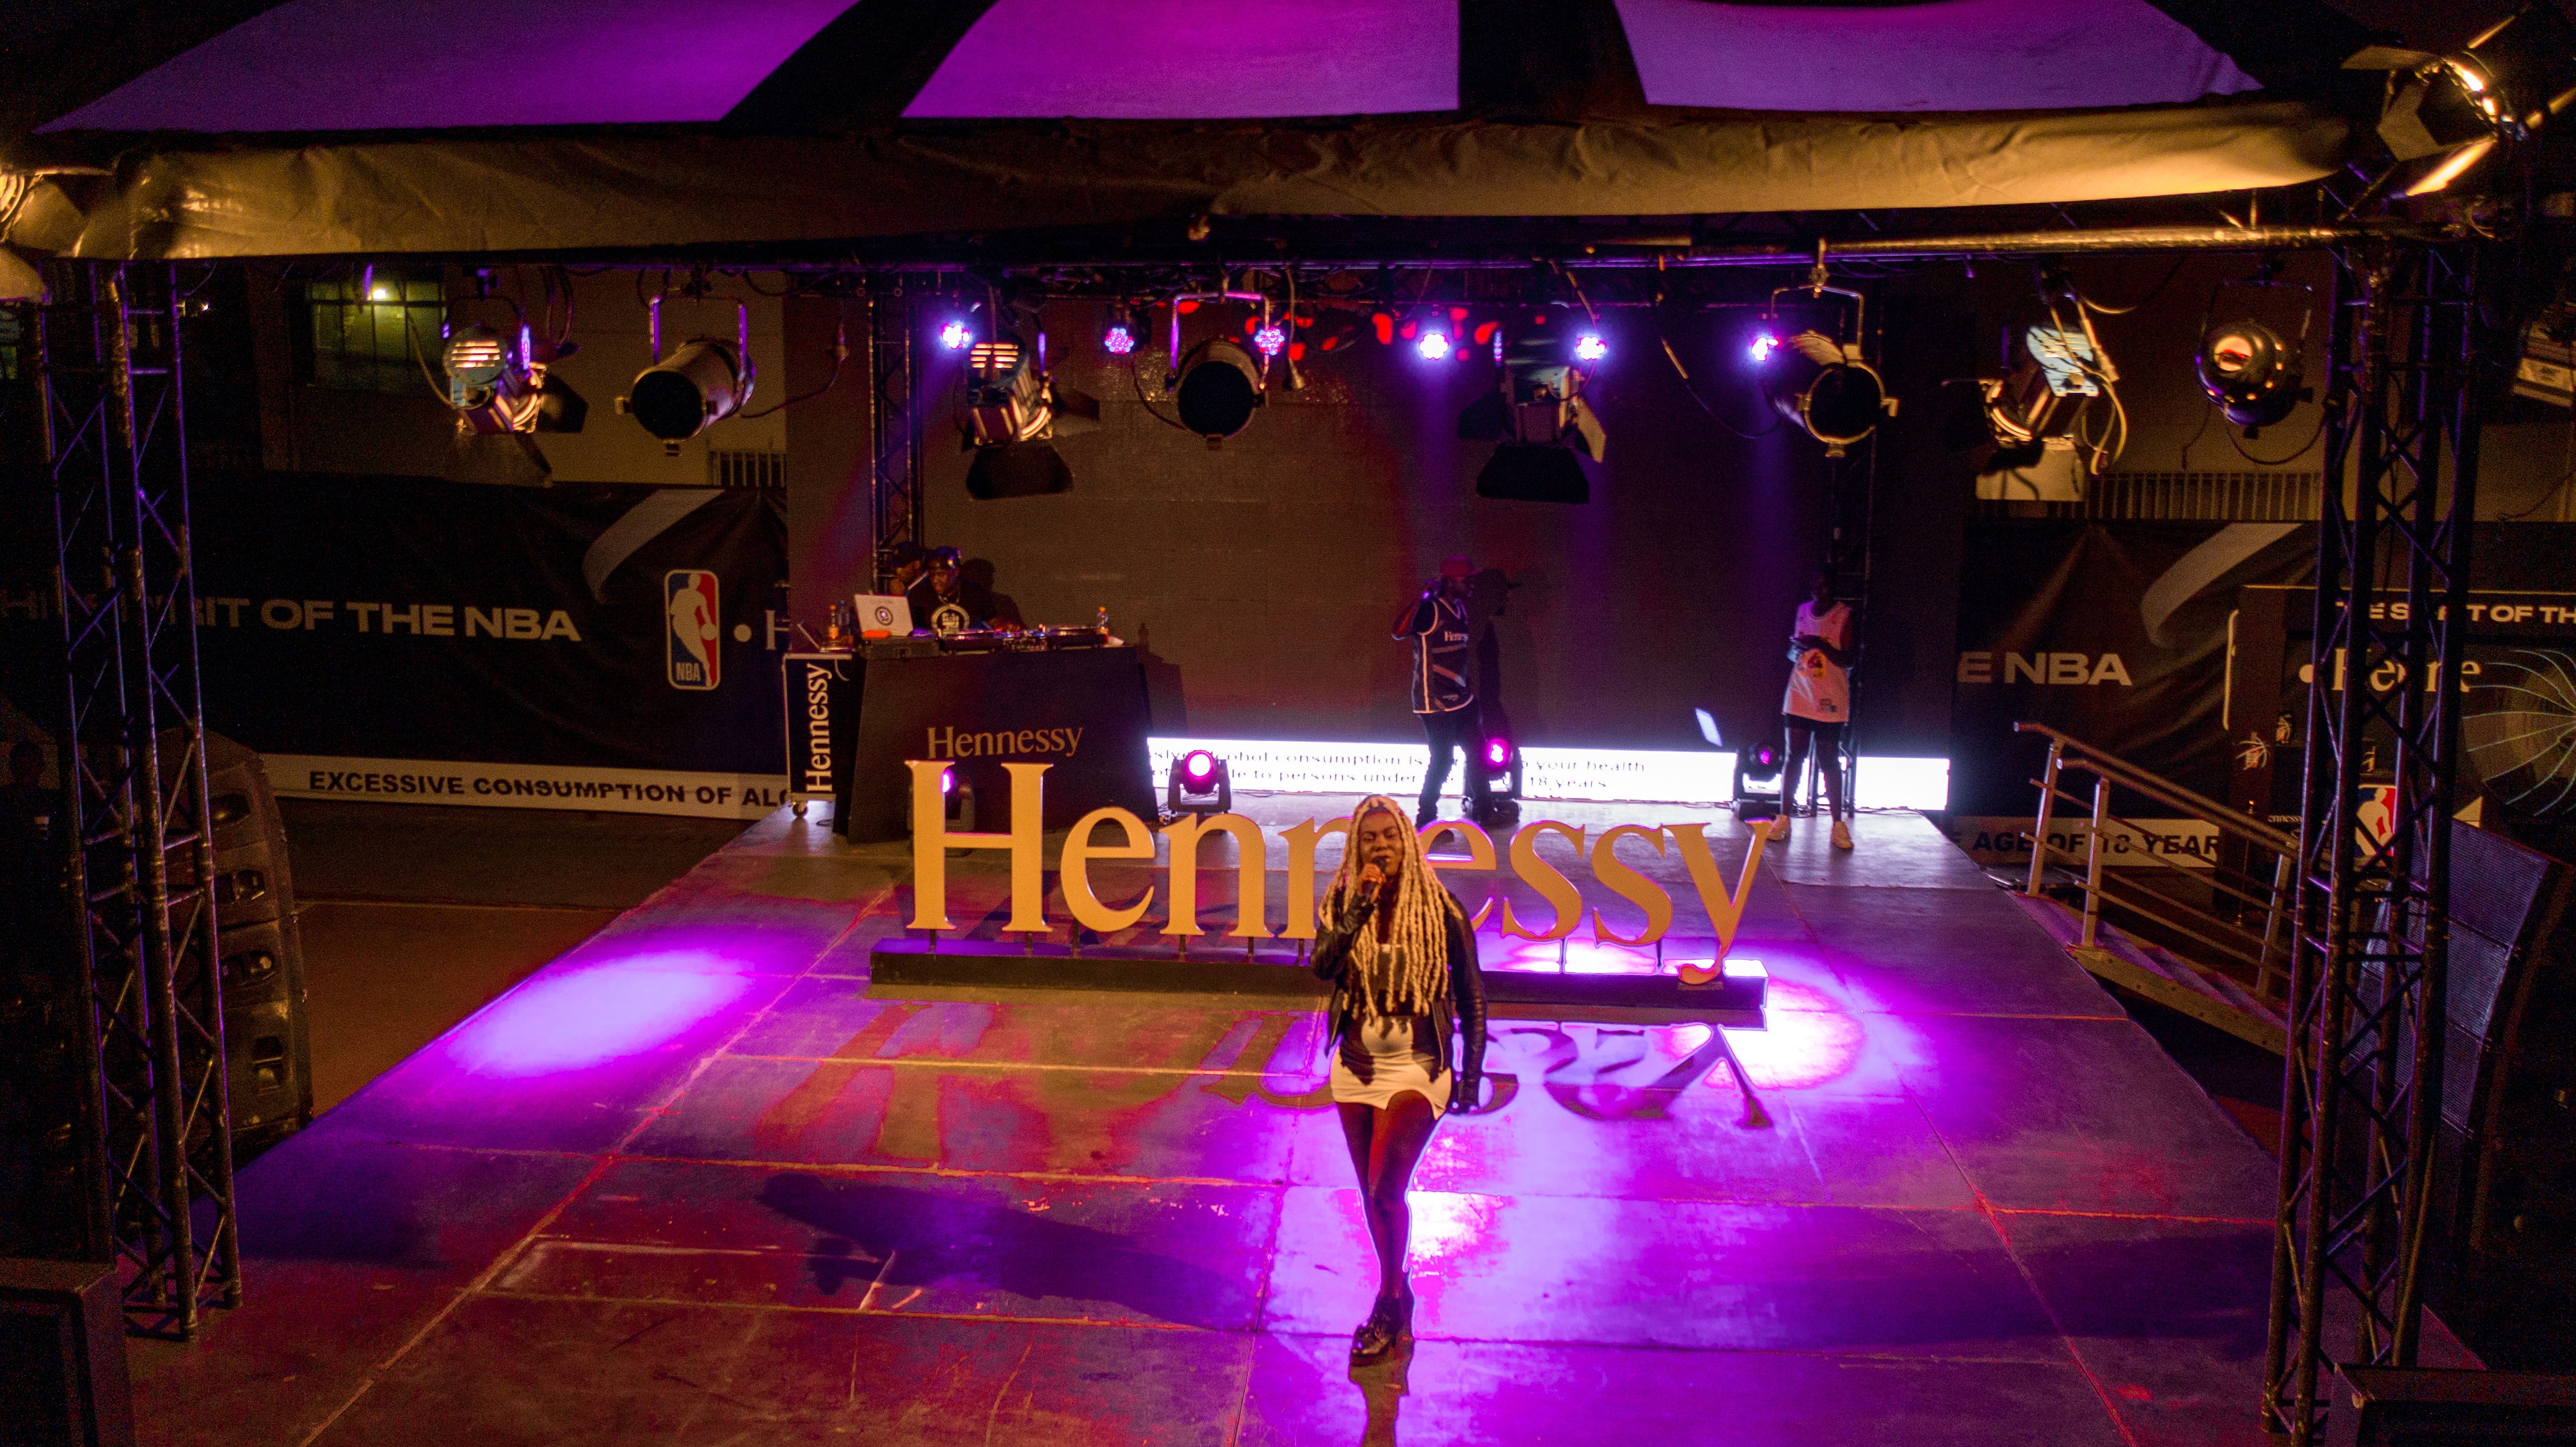 HENNESSY BECOMES THE NBA’S FIRST GLOBAL SPIRITS PARTNER